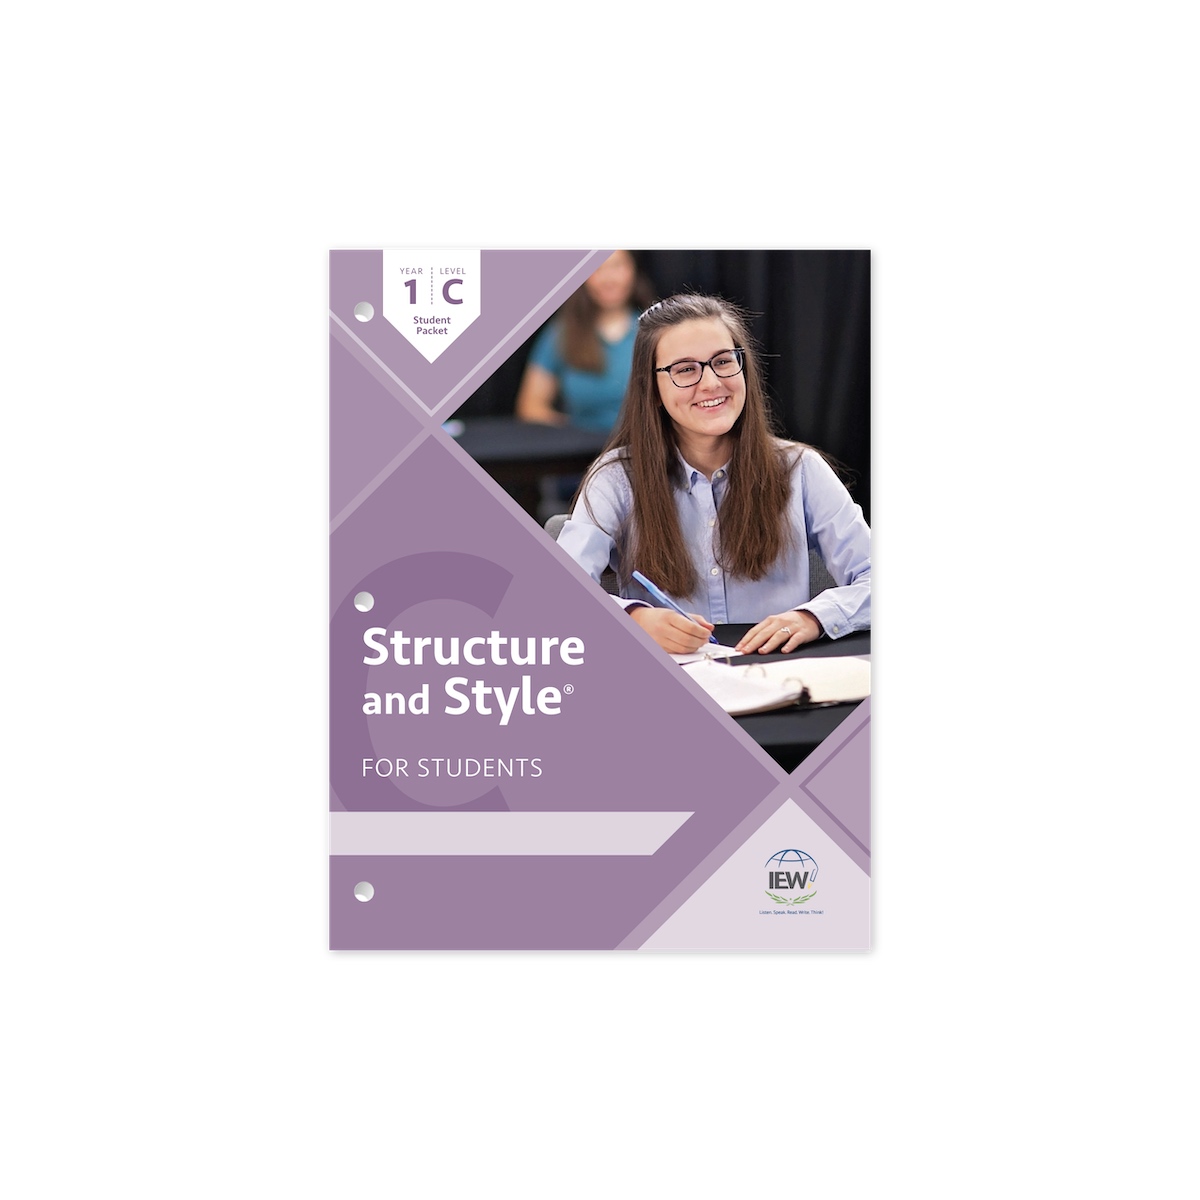 Structure and Style for Students: Year 1 Level C [Student Packet only]